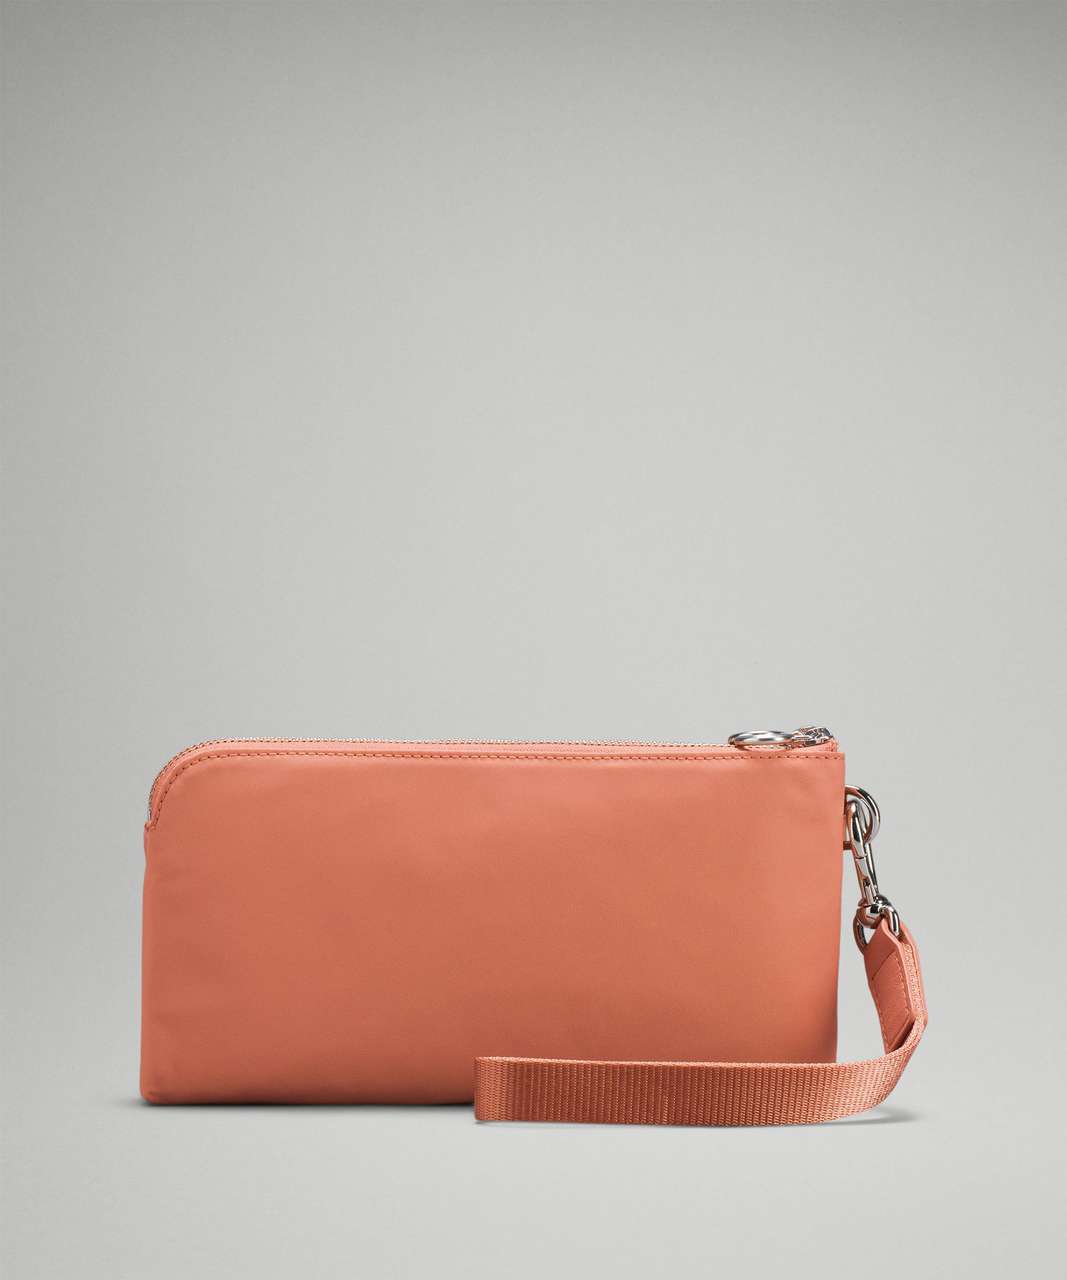 Lululemon Now and Always Pouch - Pink Savannah